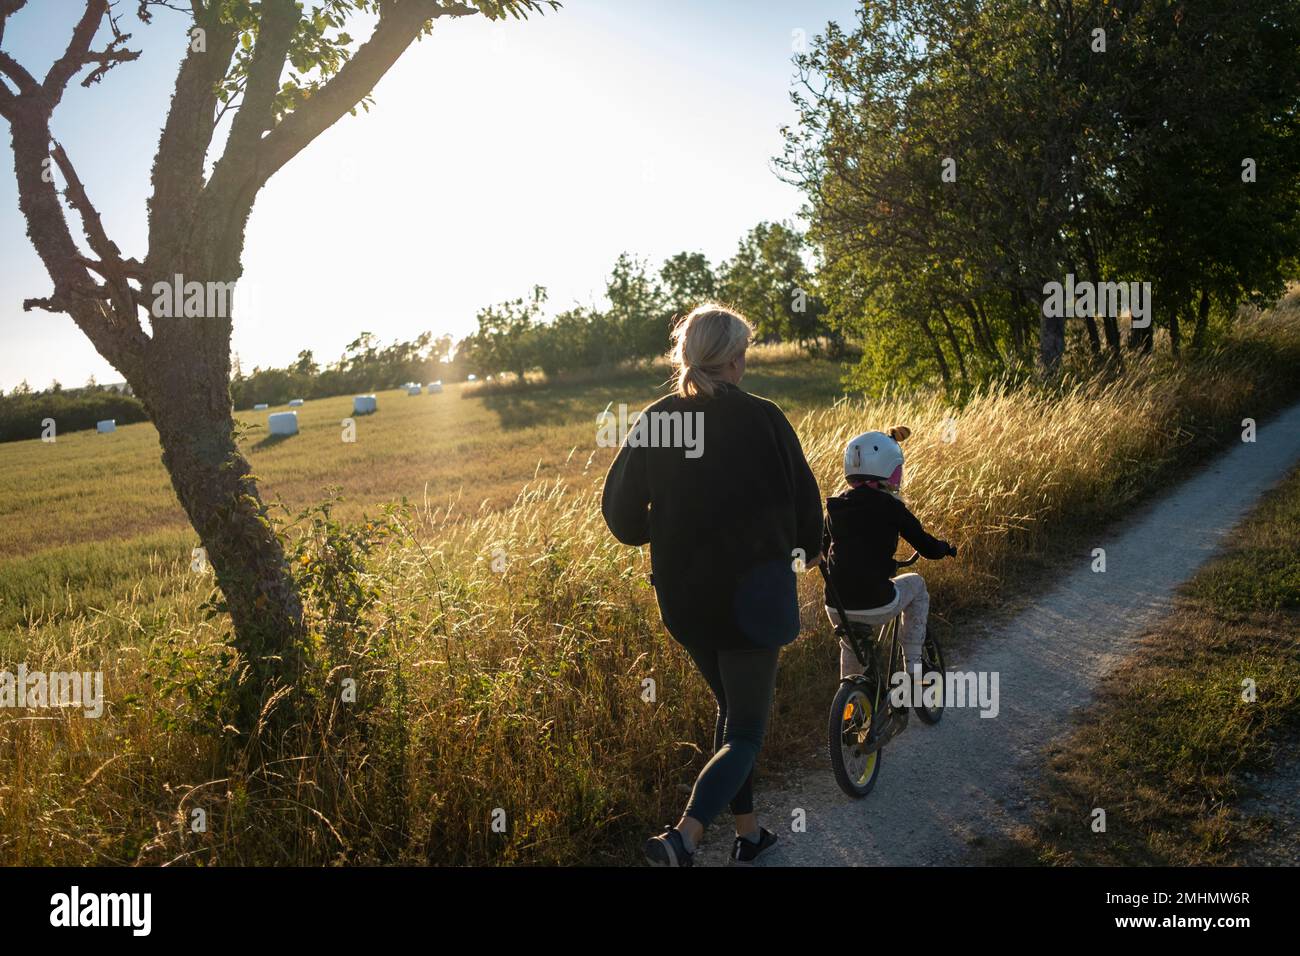 Mother teaching kid to ride bicycle on dirt road Stock Photo